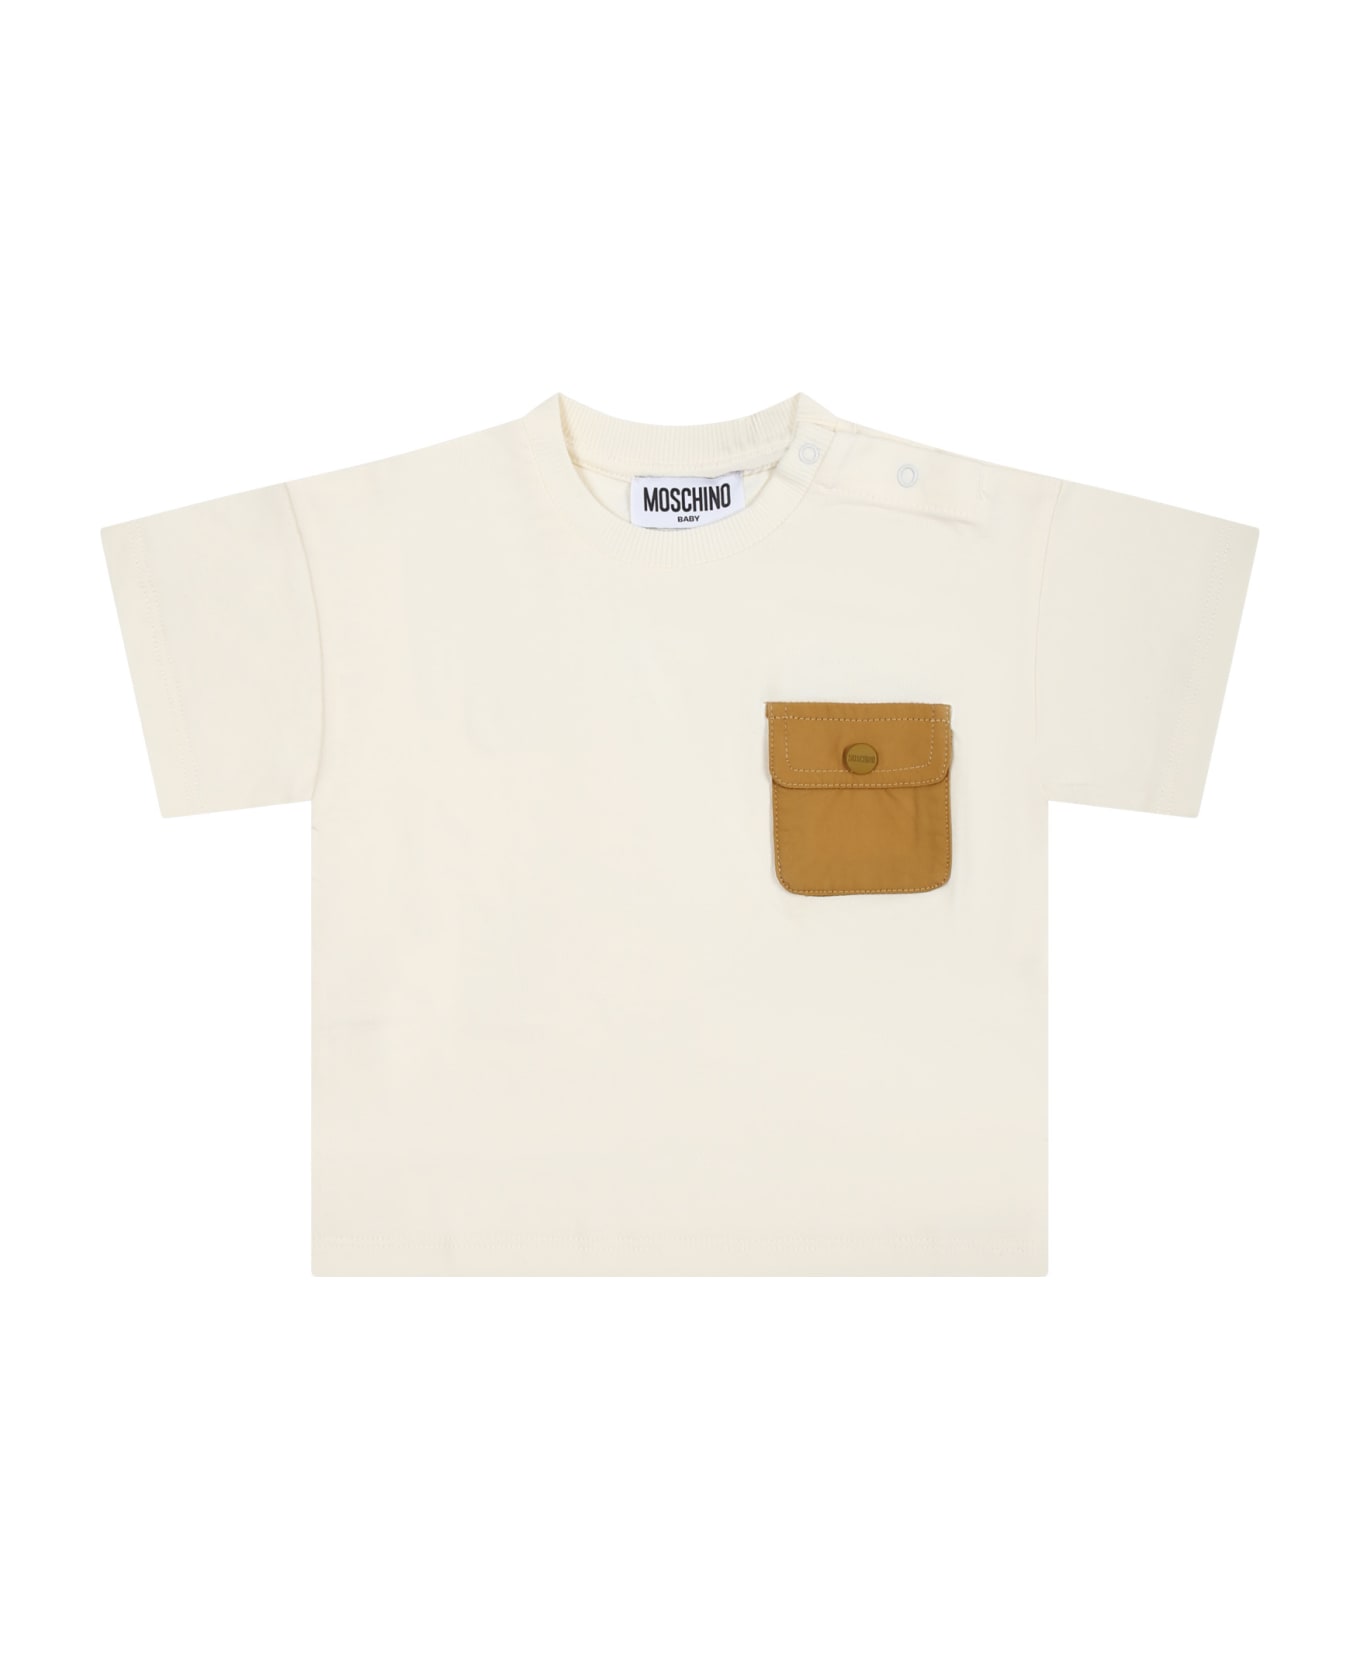 Moschino Ivory T-shirt For Baby Boy With Pocket - Ivory